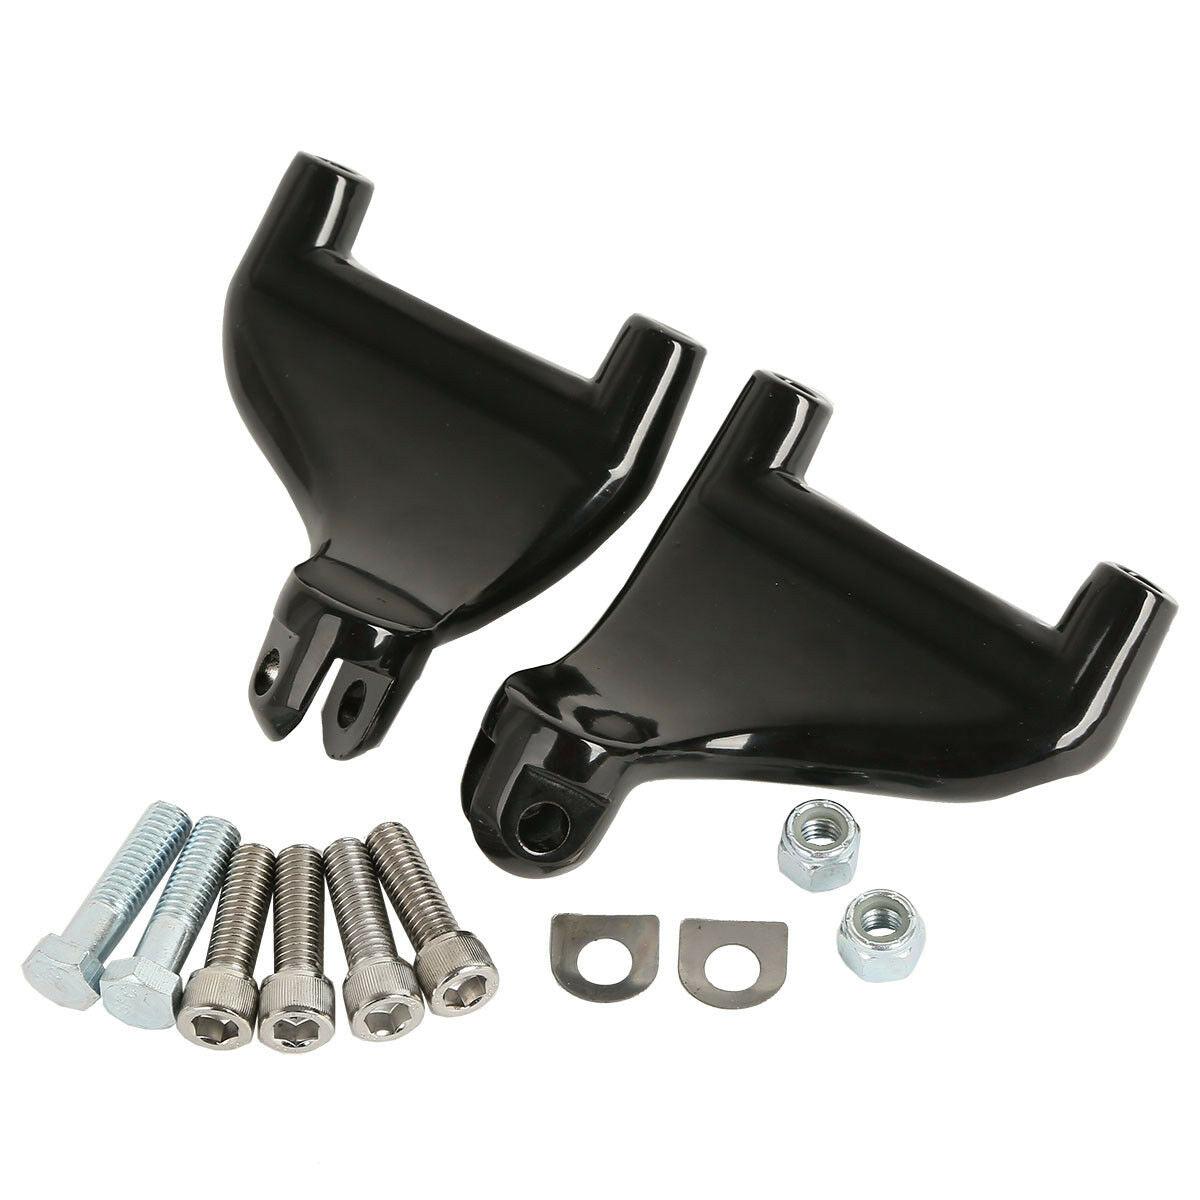 Rear Footpeg Foot Pegs Mounting Clamp Fit For Harley 883 1200 XL Sportster 04-13 - Moto Life Products